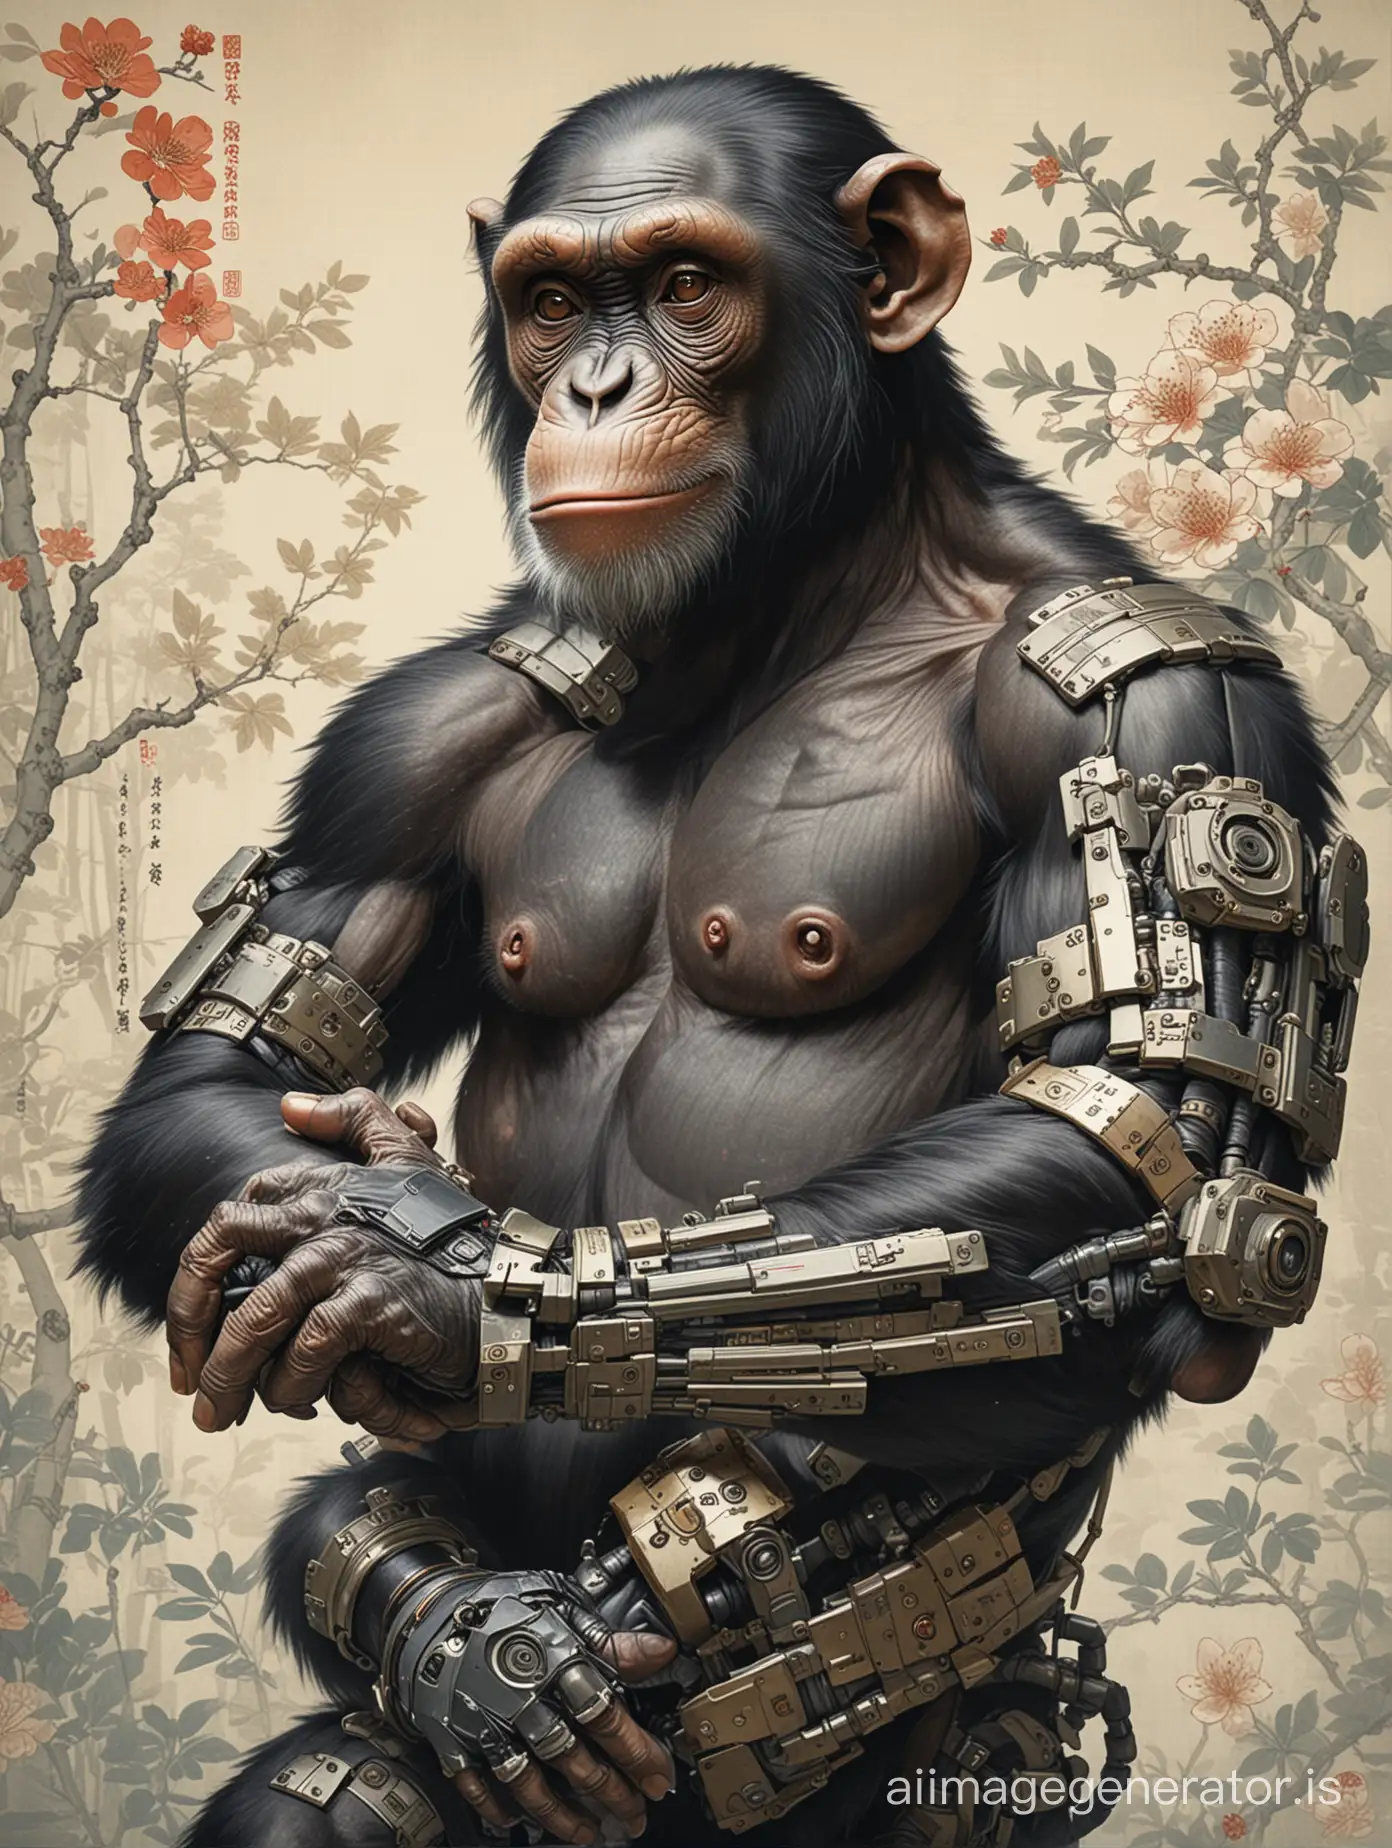 Chimpanzee, with cybernetic arms. Arms crossed., in ukiyo-e art style, traditional japanese masterpiece, (anthro:0.1)